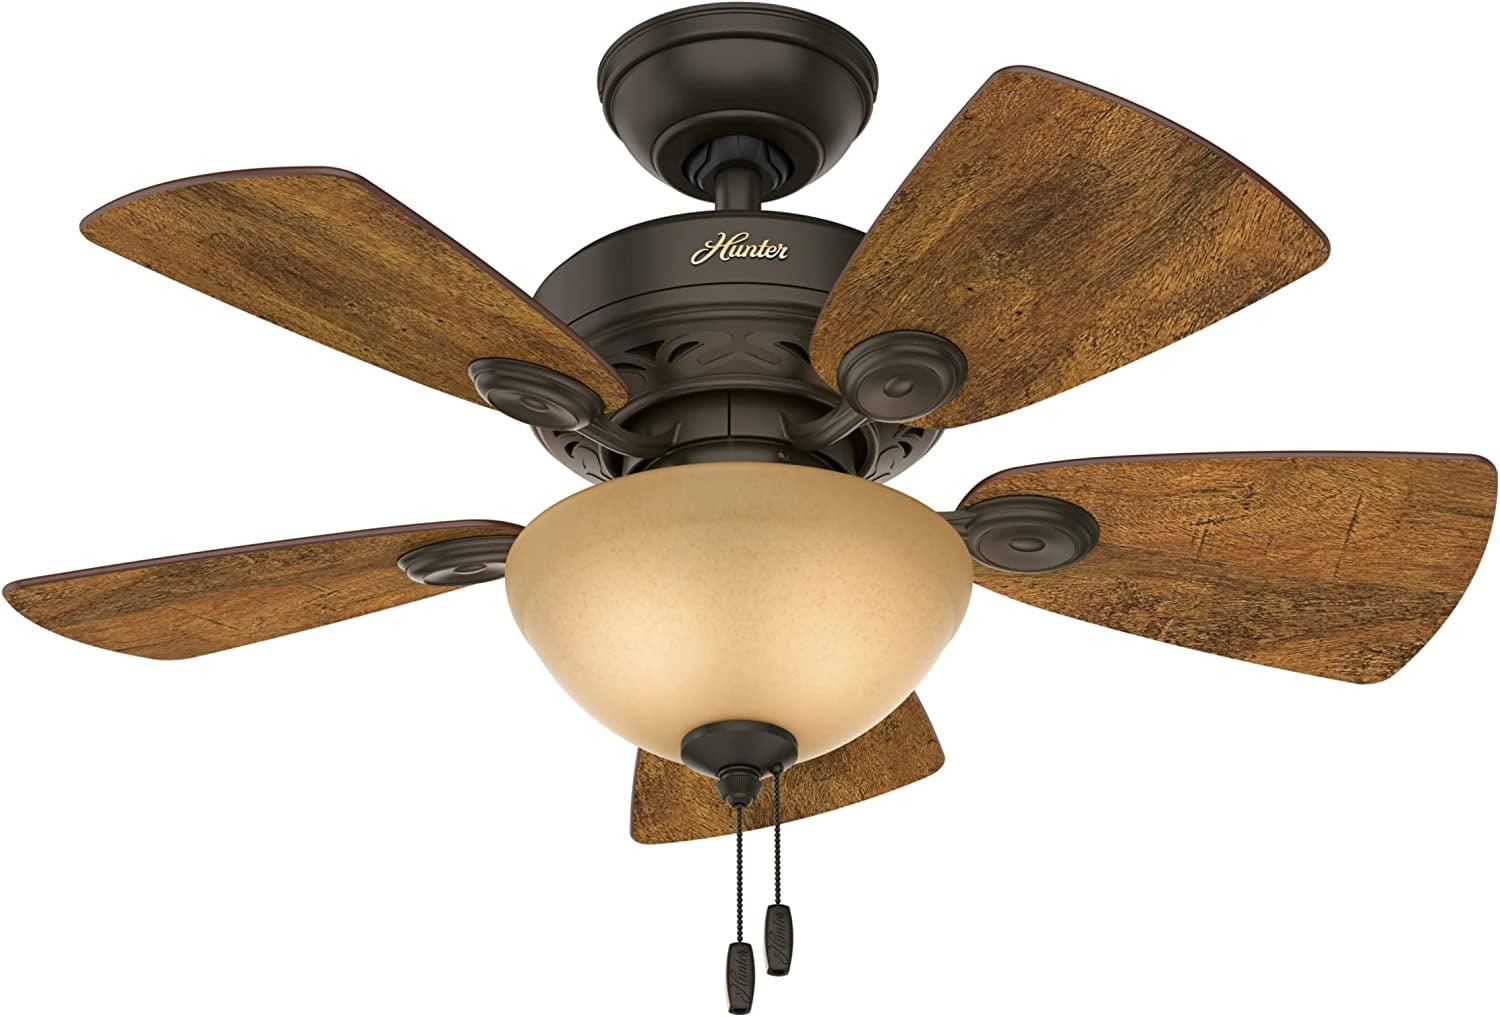 WhisperWind 34" New Bronze Ceiling Fan with Walnut Blades and LED Lights